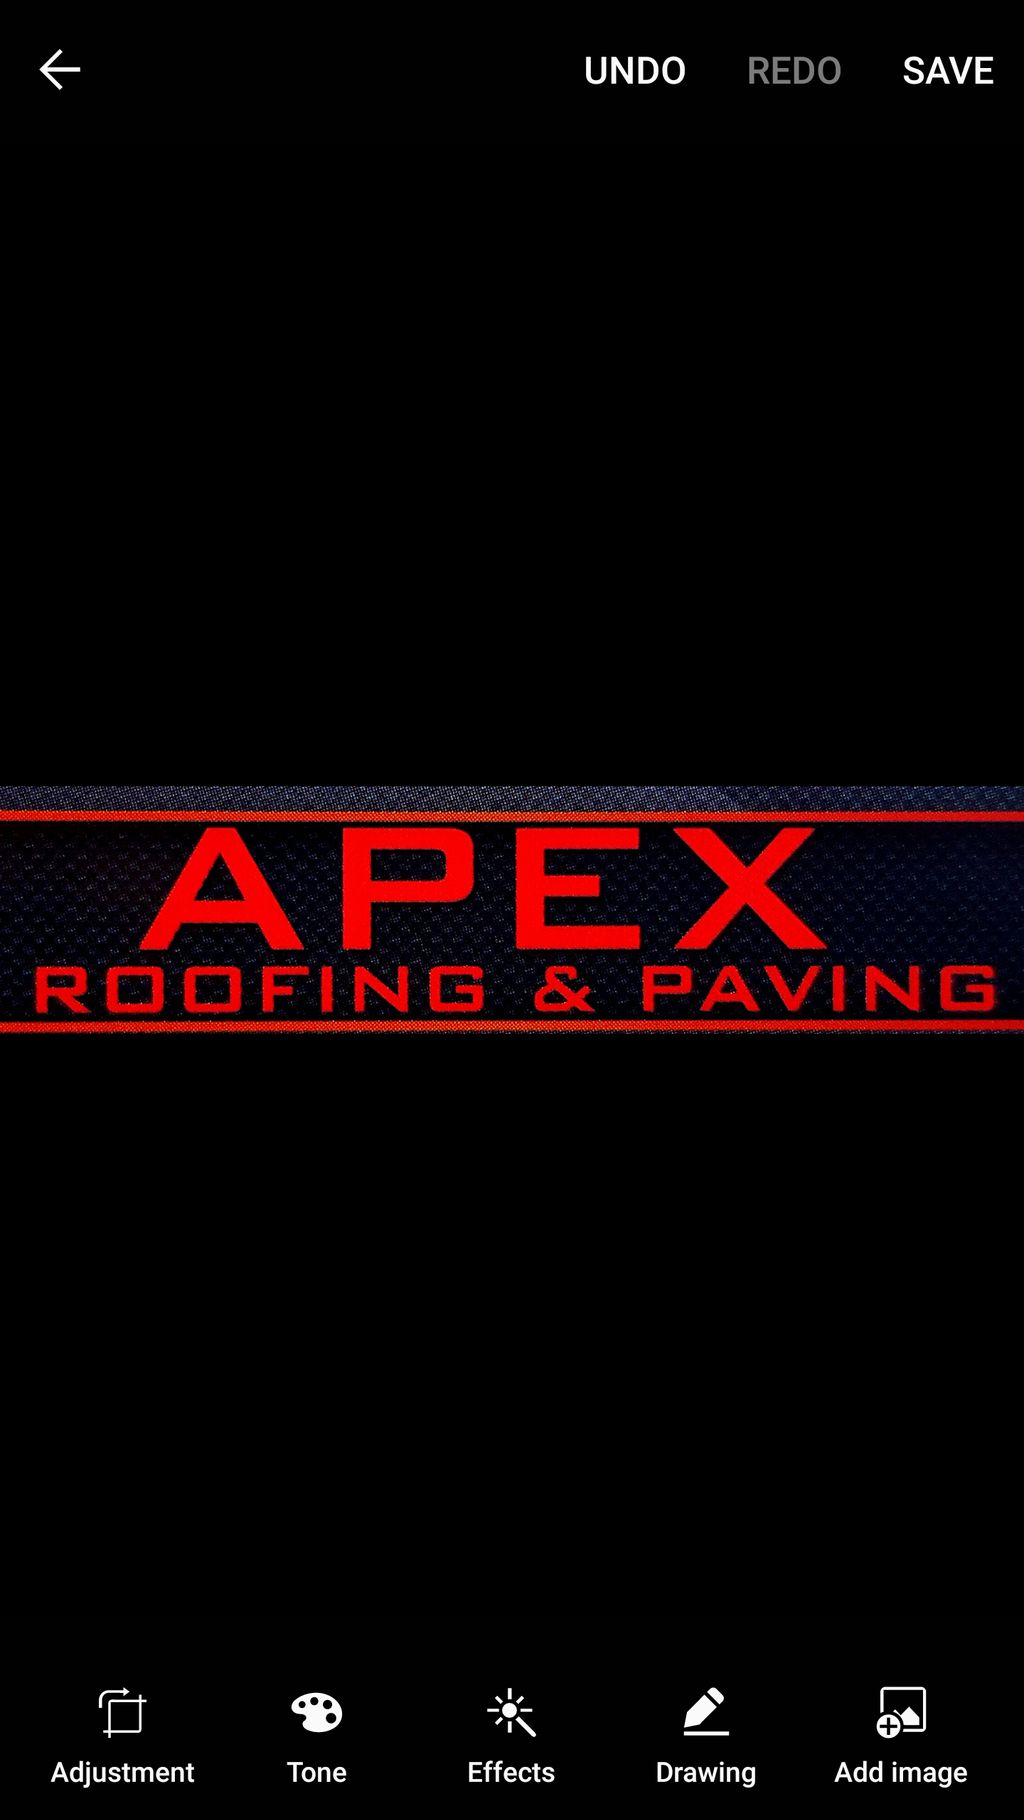 APEX ROOFING & PAVING